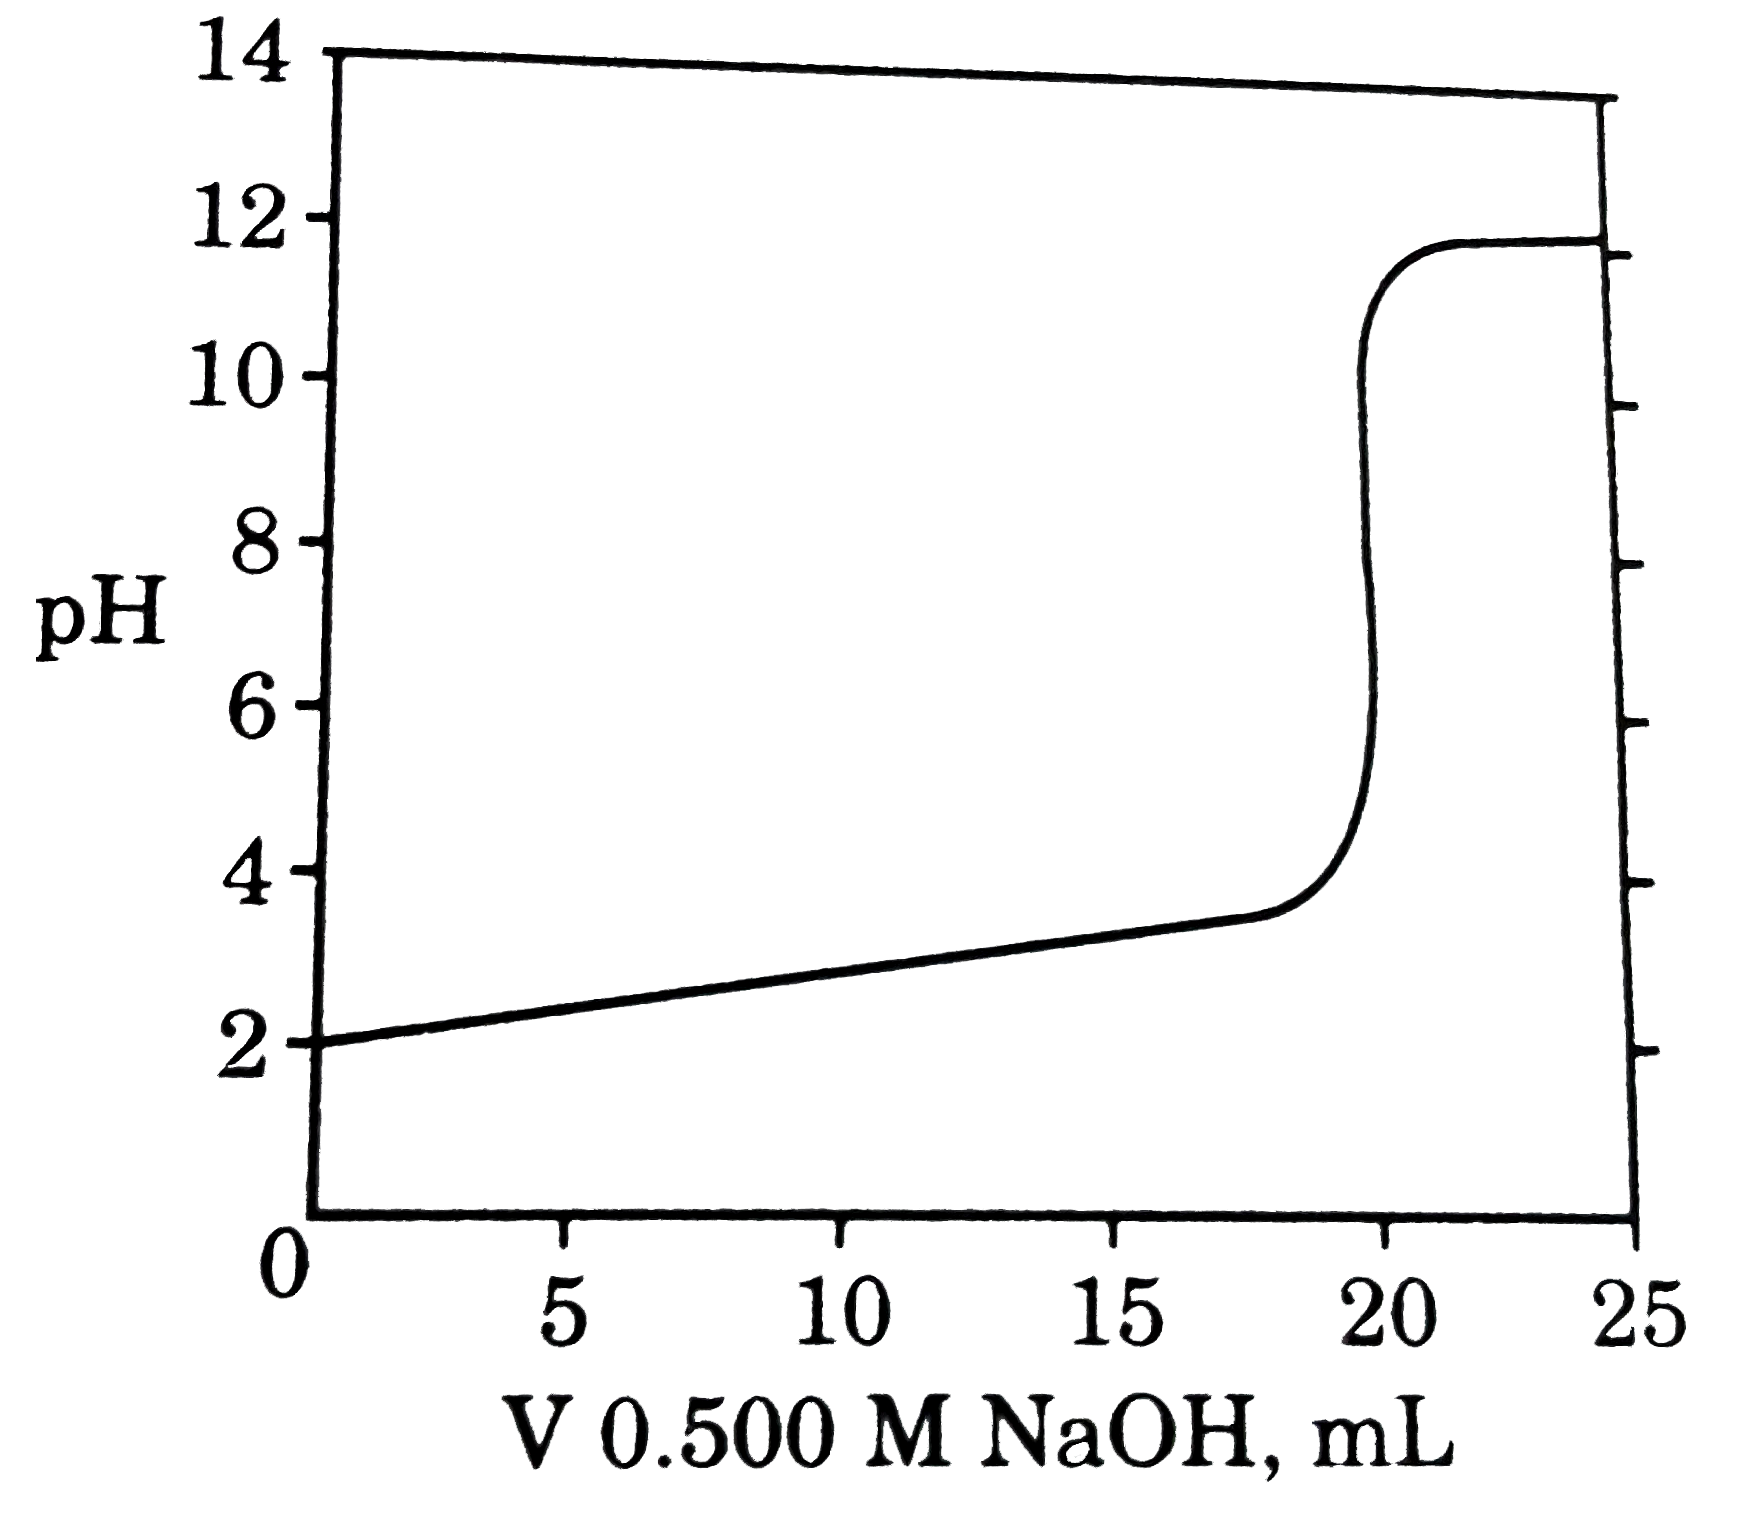 A sample of 100 mL of a solution of a weak monoprotic acid of unknown concentration is titrated with 0.500 M NaOH to give the titration curve shown.  All of the statements are correct except: